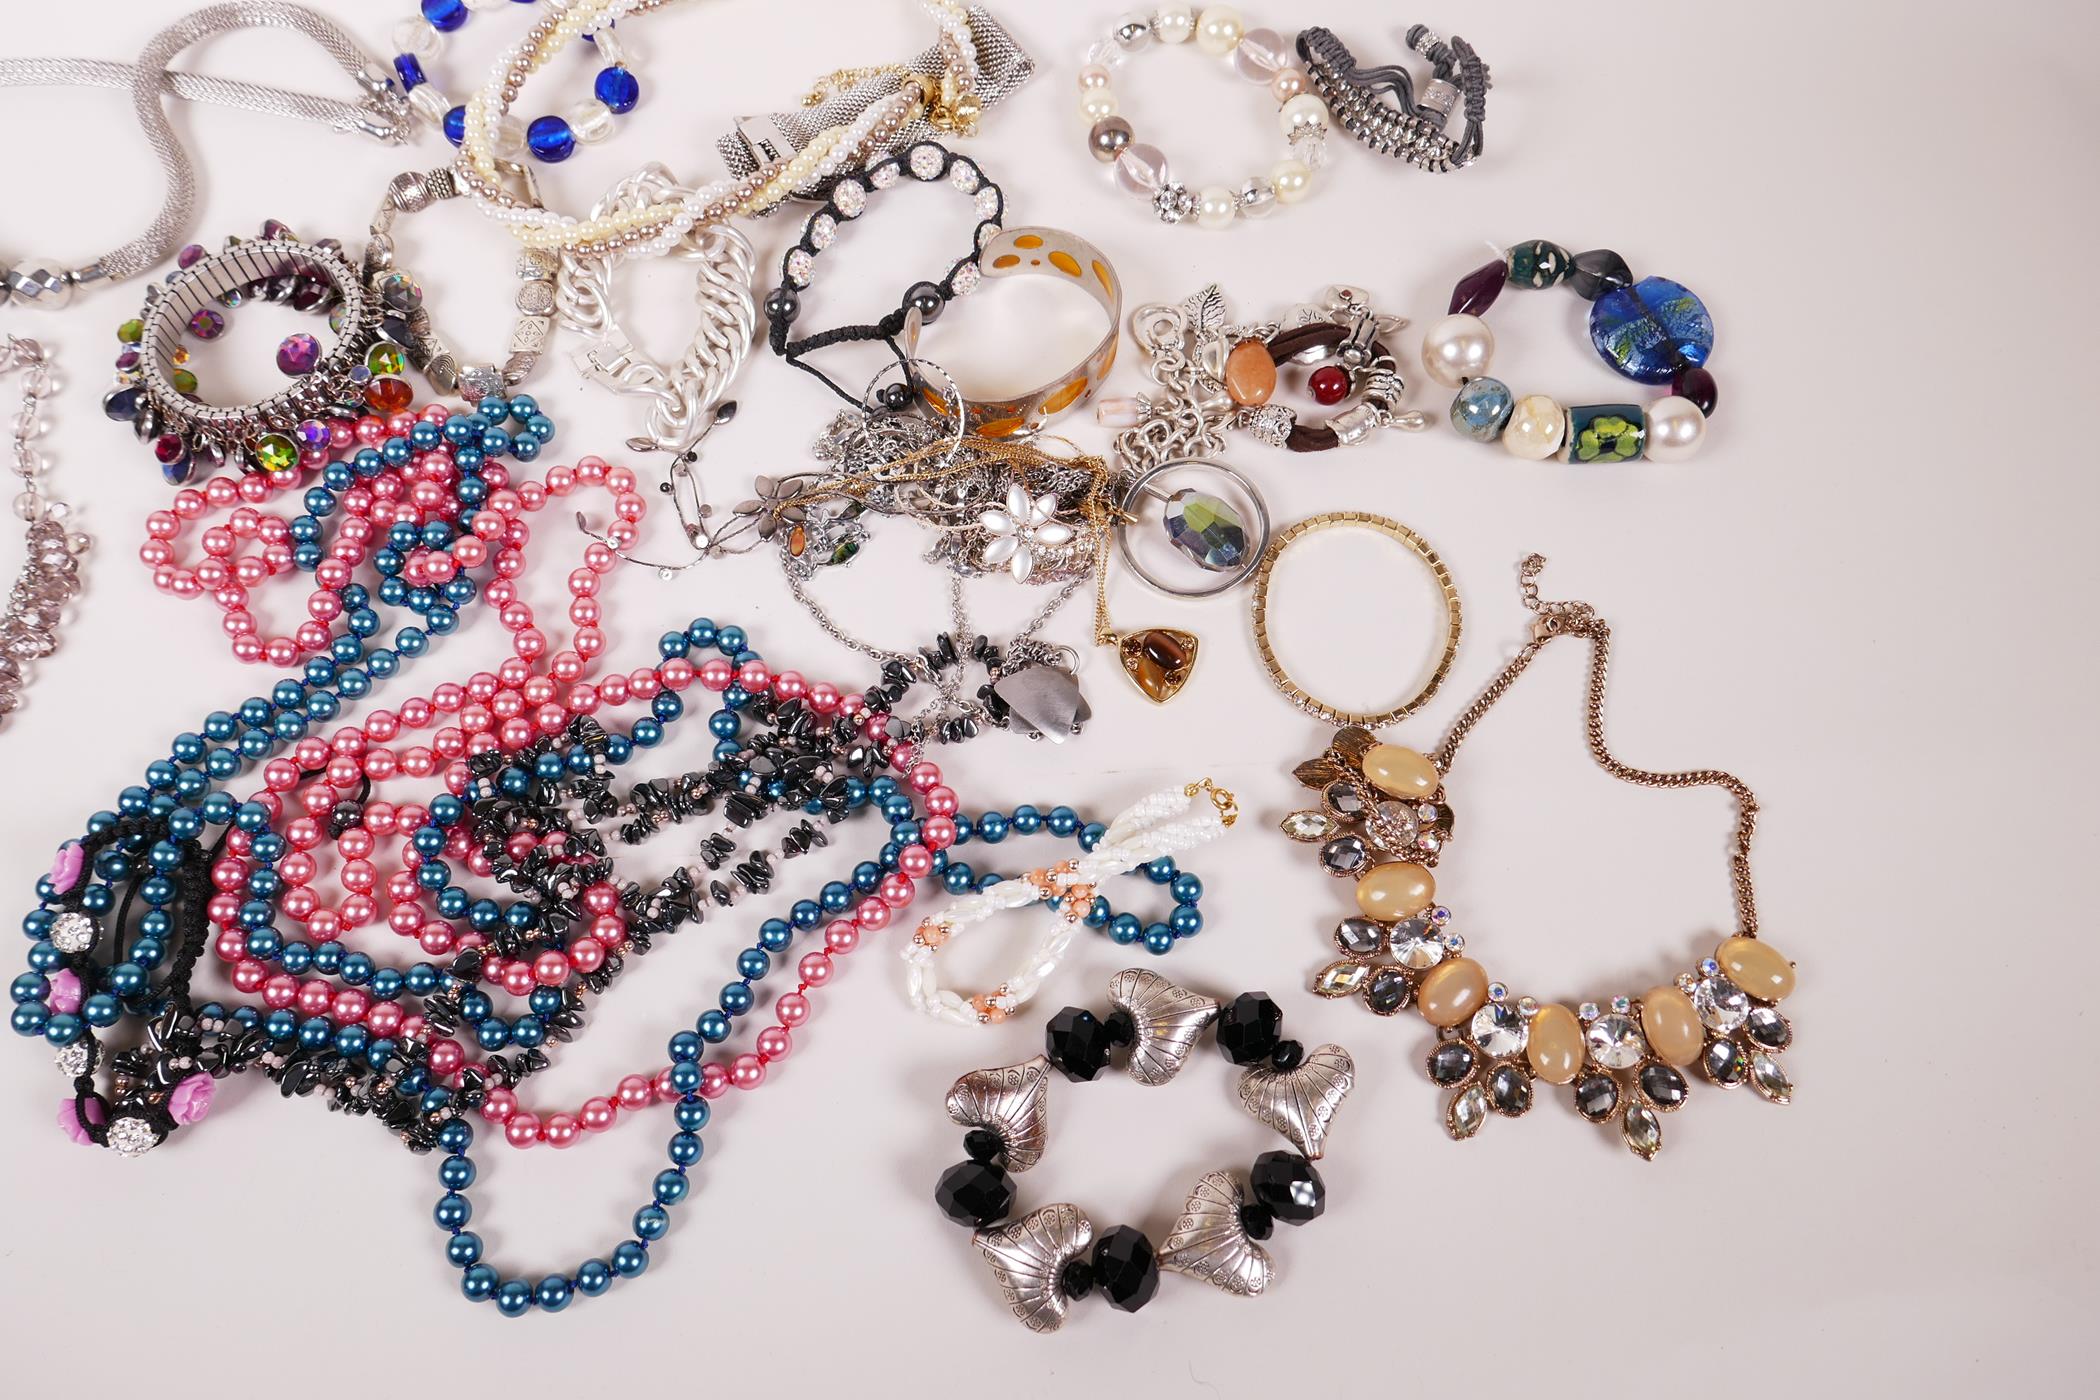 A quantity of costume jewellery, bead necklaces, bangles etc - Image 3 of 3